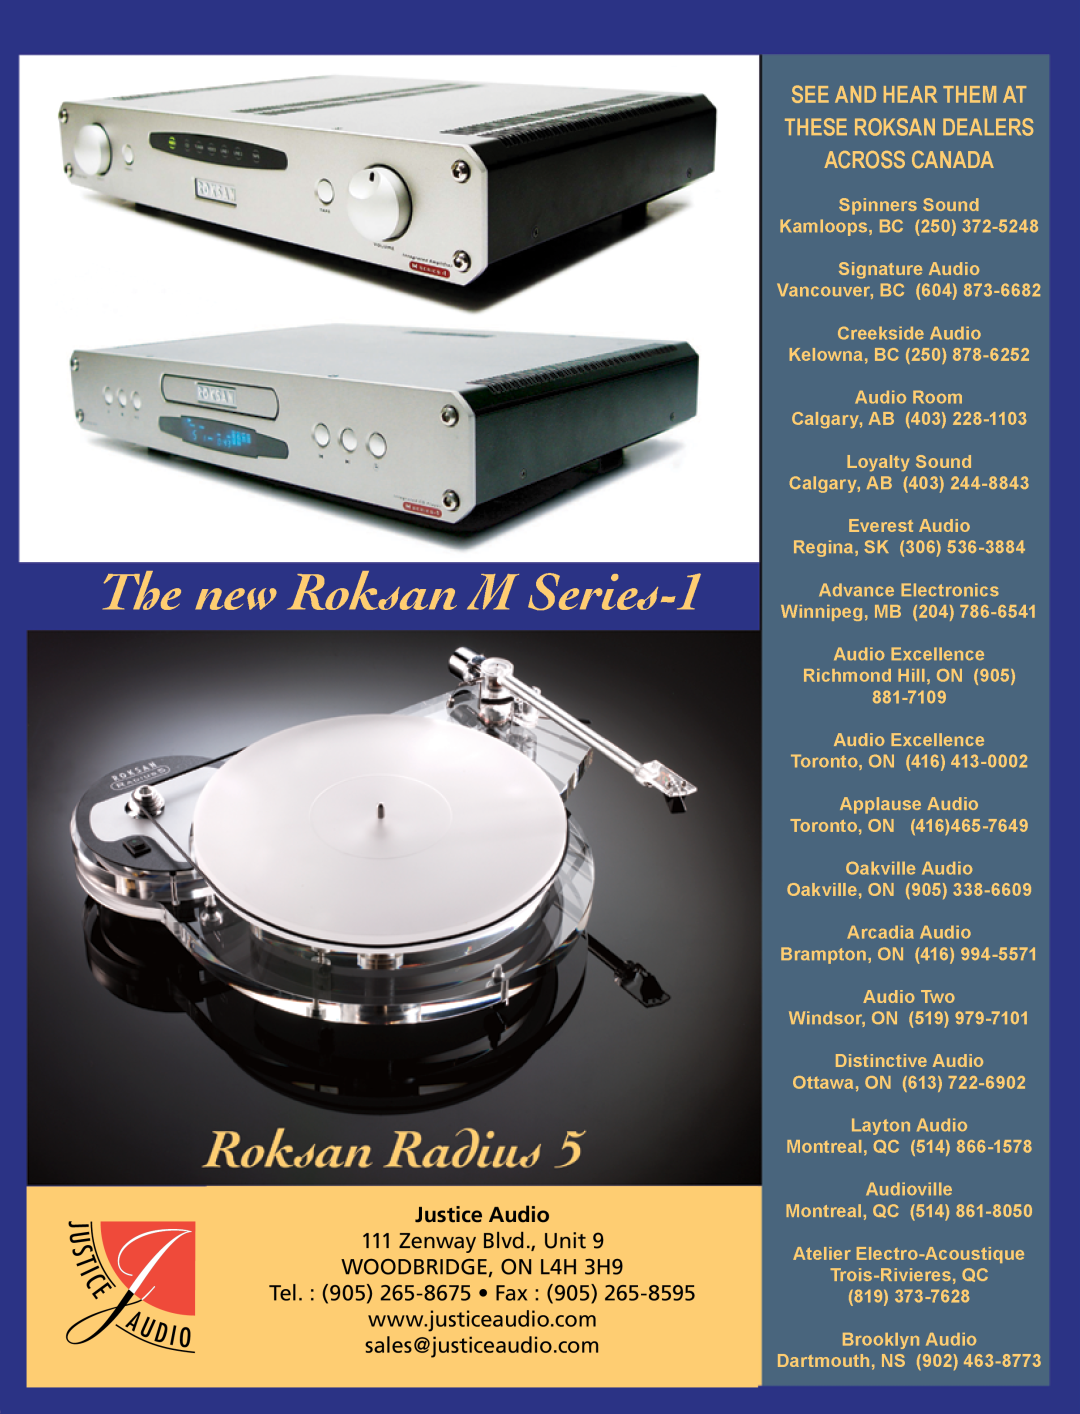 Koss 76 manual The new Roksan M Series-1, See And Hear Them At These Roksan Dealers Across Canada, Justice Audio 